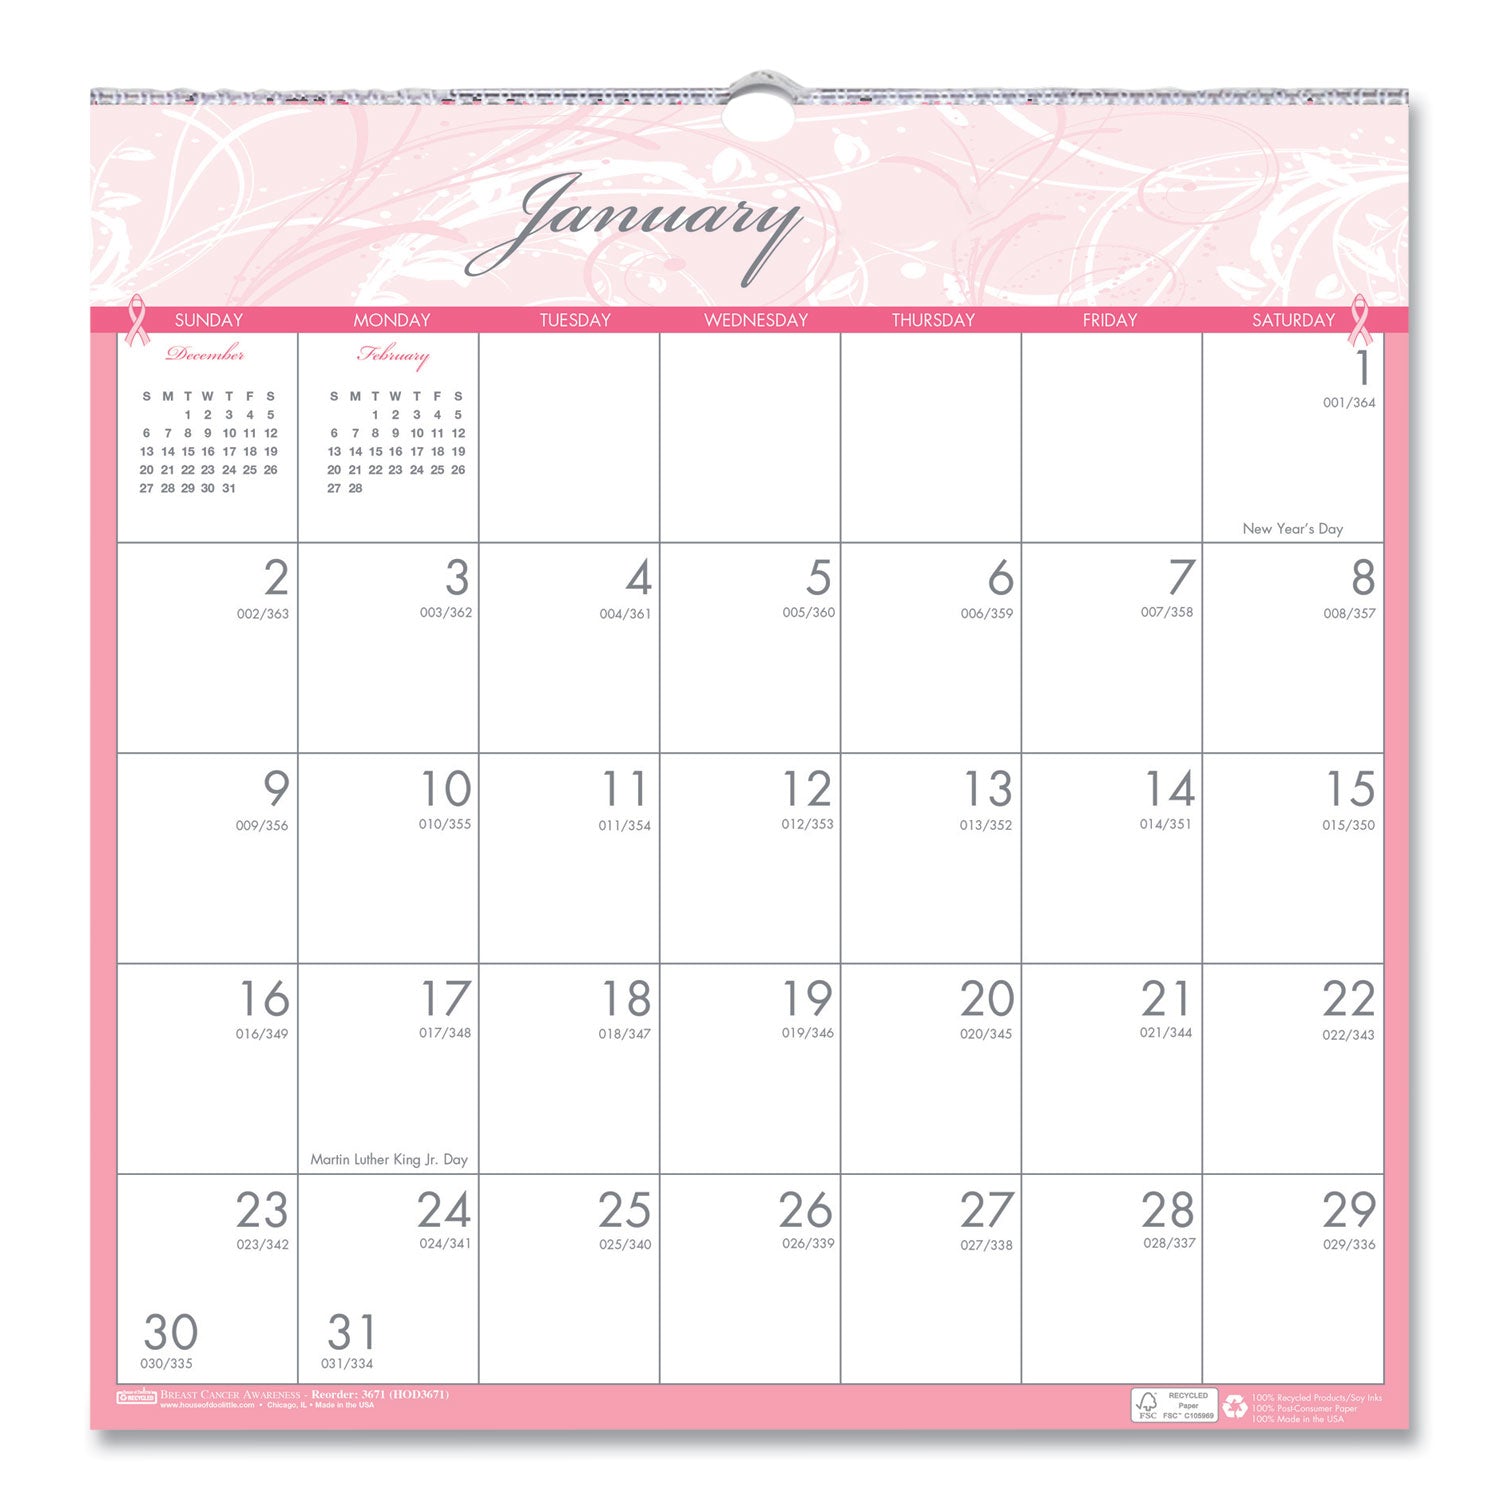 recycled-monthly-wall-calendar-breast-cancer-awareness-artwork-12-x-12-white-pink-gray-sheets-12-month-jan-dec-2024_hod3671 - 1